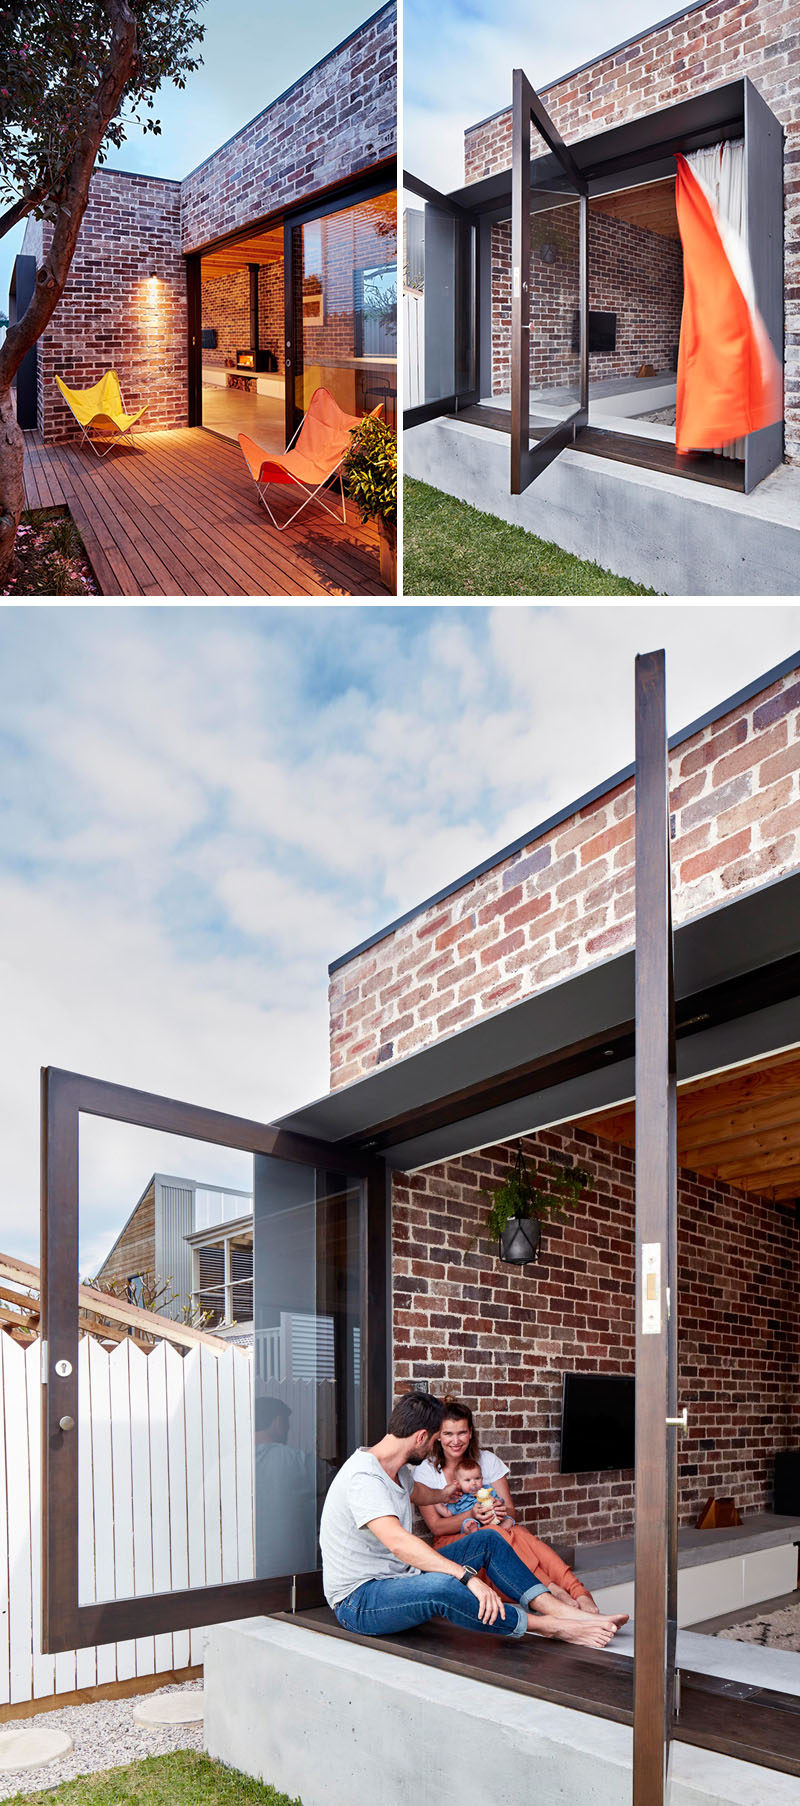 14 Modern Houses Made Of Brick // This small family home is covered with bricks that contrast the modern features of the house, like the large pivoting windows.